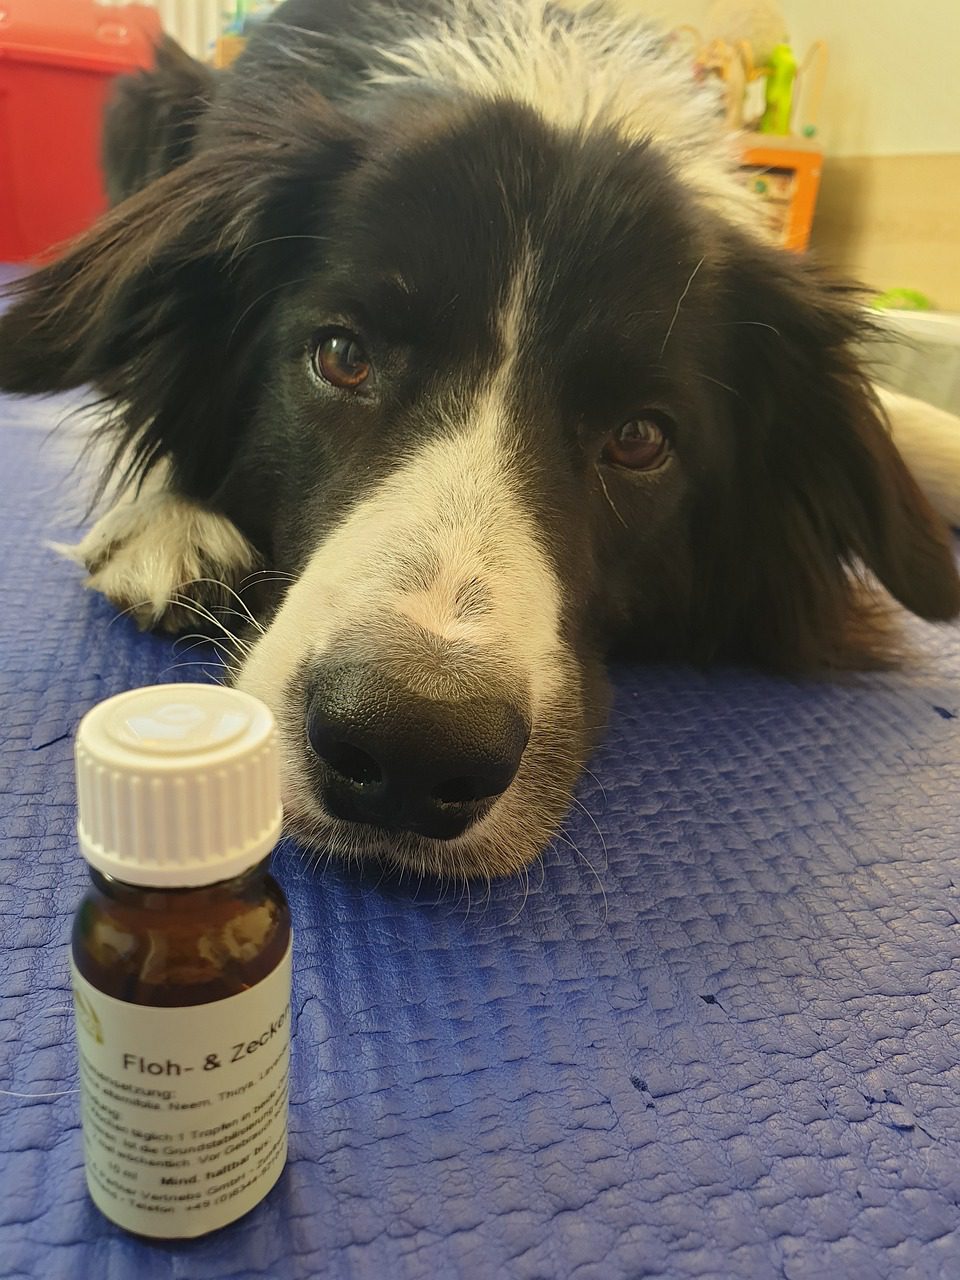 When To Give Digestive Enzymes For Dogs?